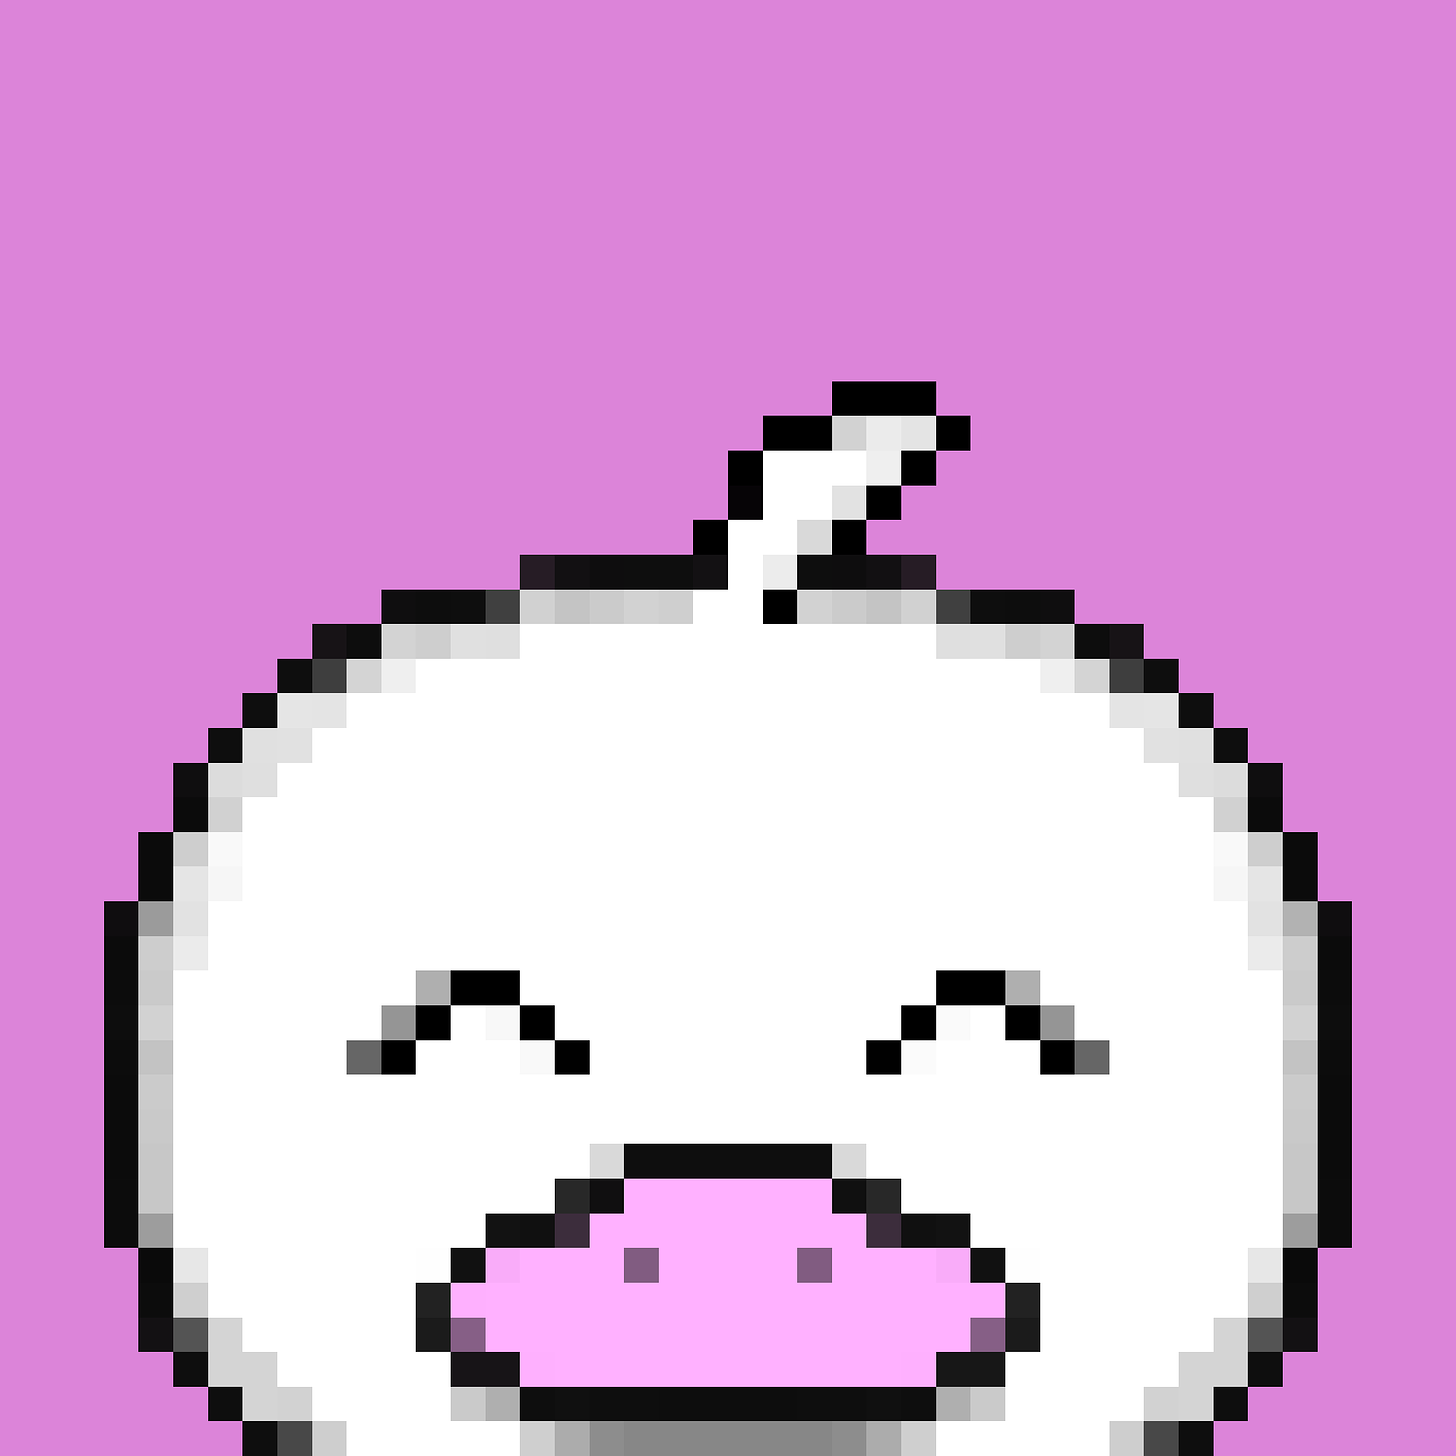 A pixel art duck with a pink bill on a pink background